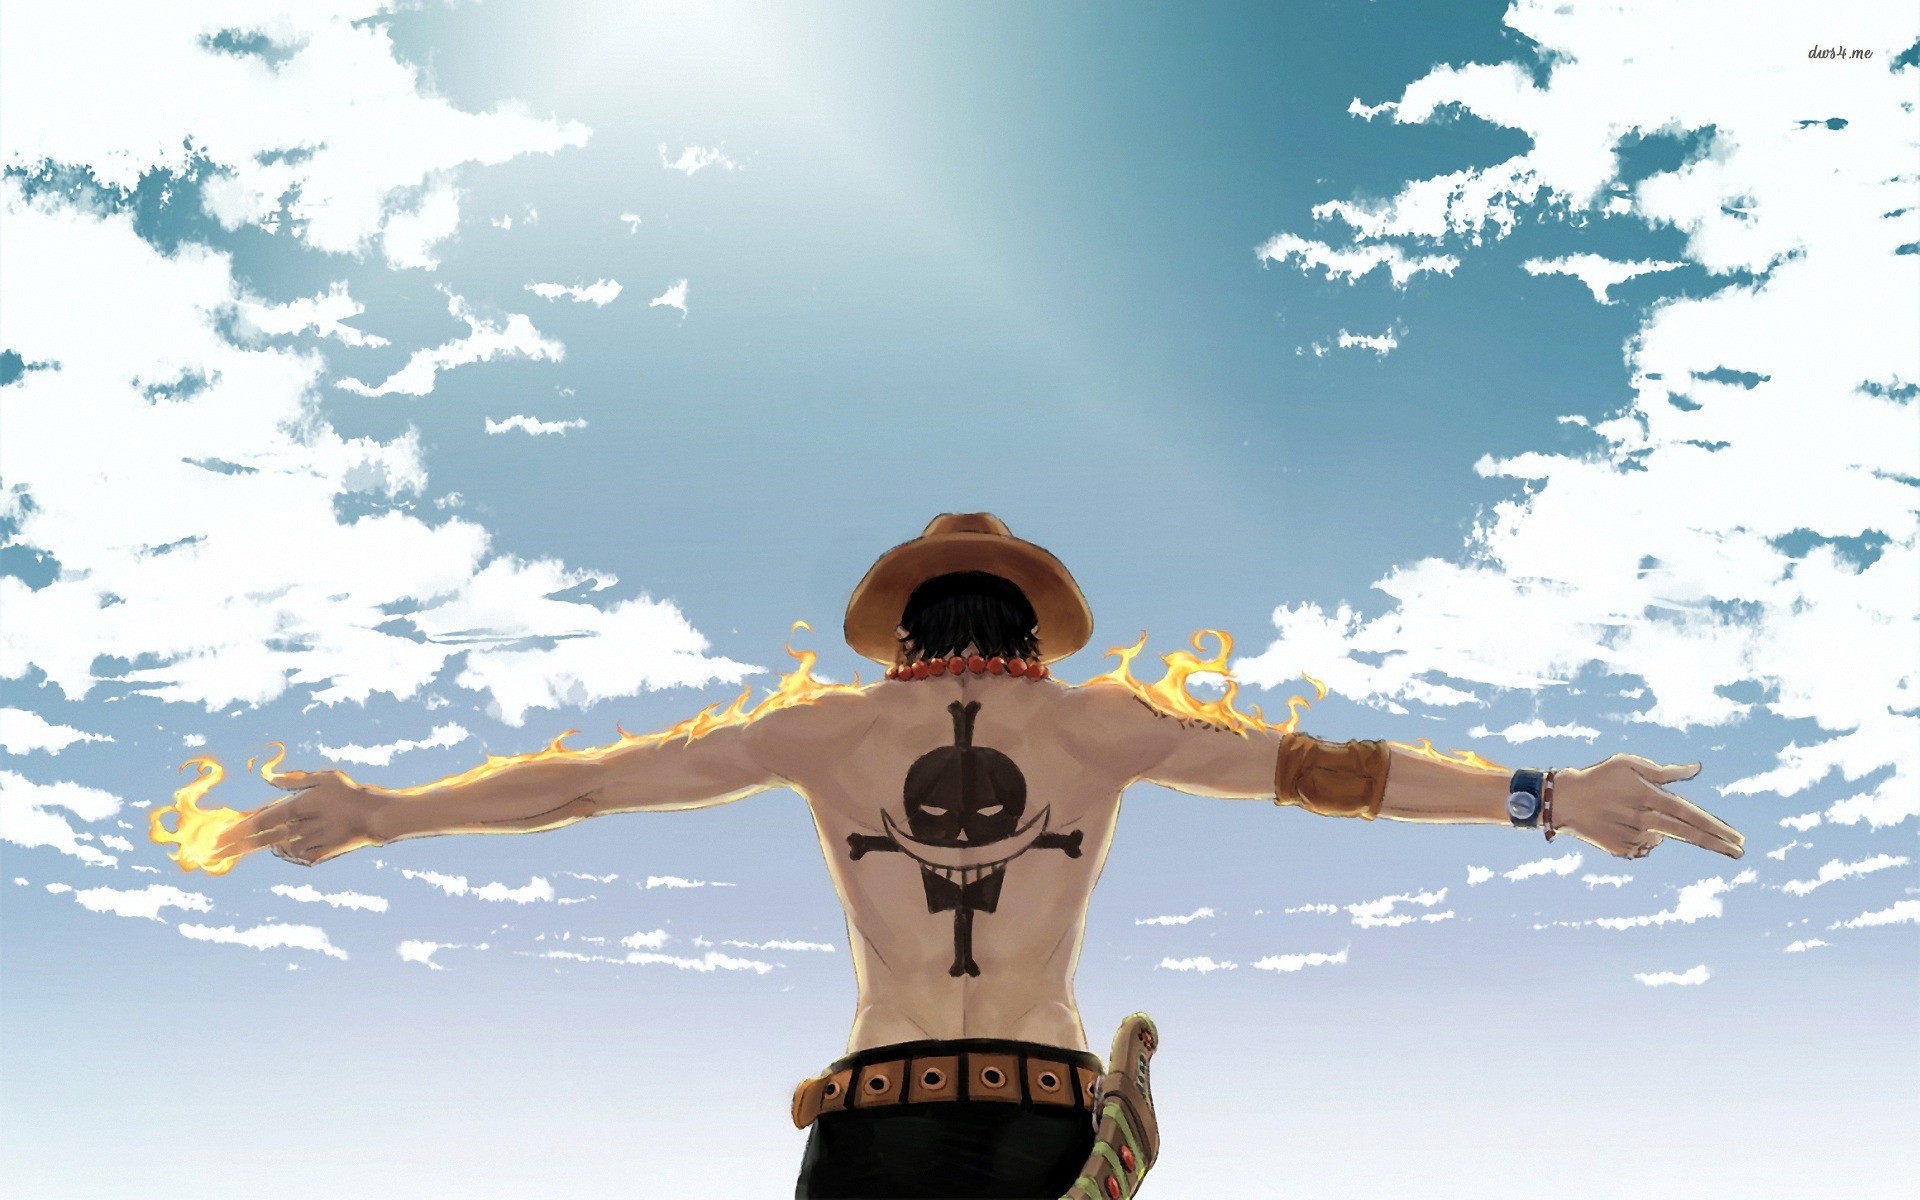 Anime 1920x1200 One Piece Portgas D. Ace anime standing arms sky clouds hat back tattoo hand gesture skull